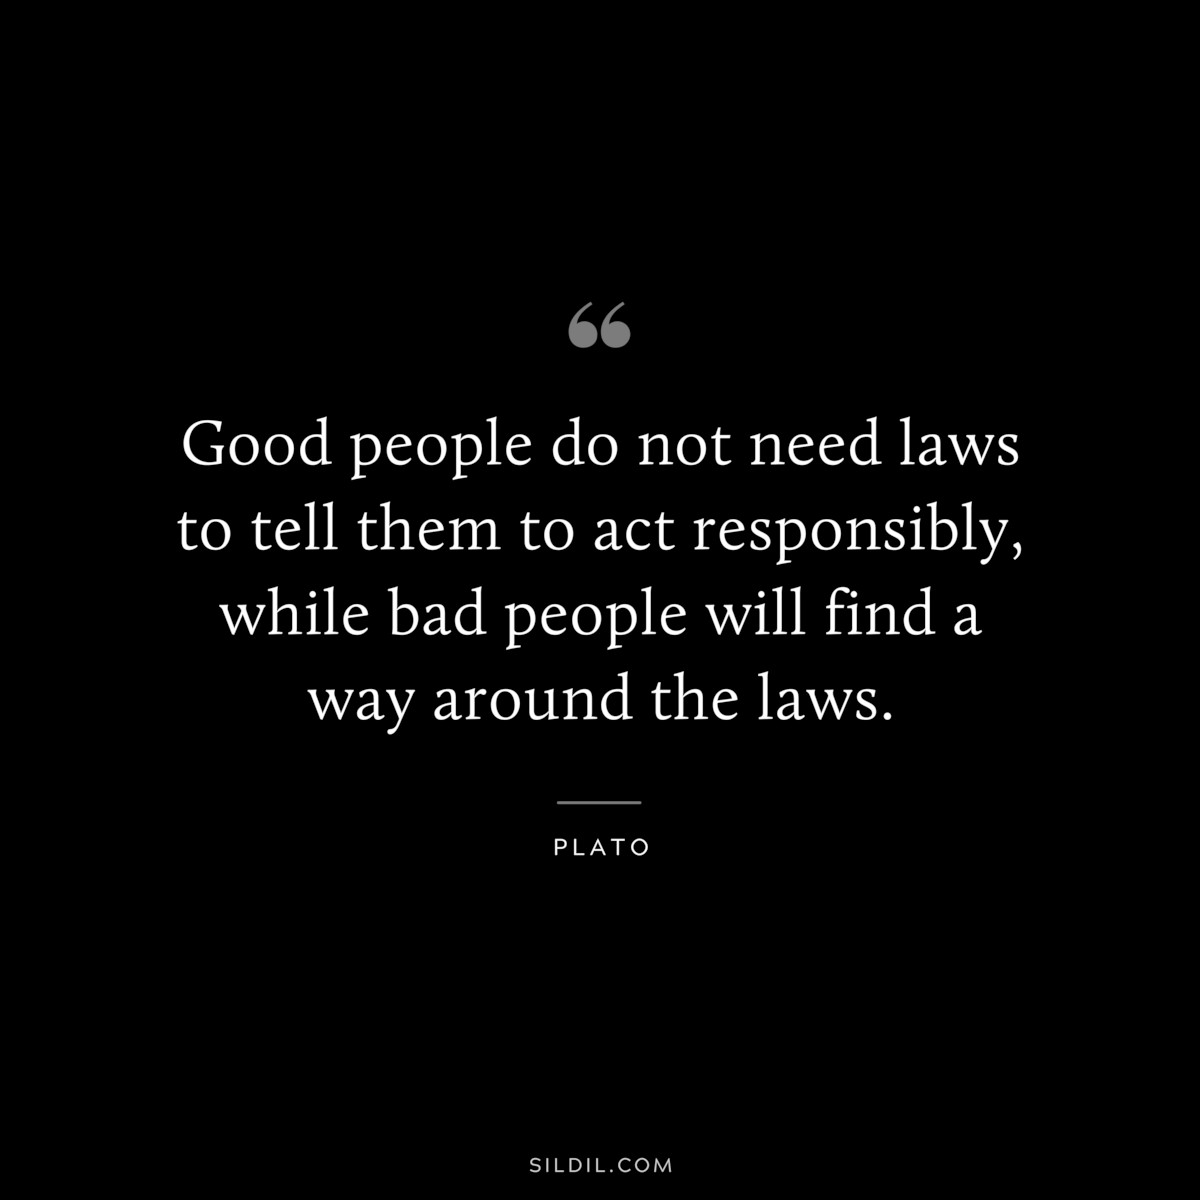 Good people do not need laws to tell them to act responsibly, while bad people will find a way around the laws. ― Plato